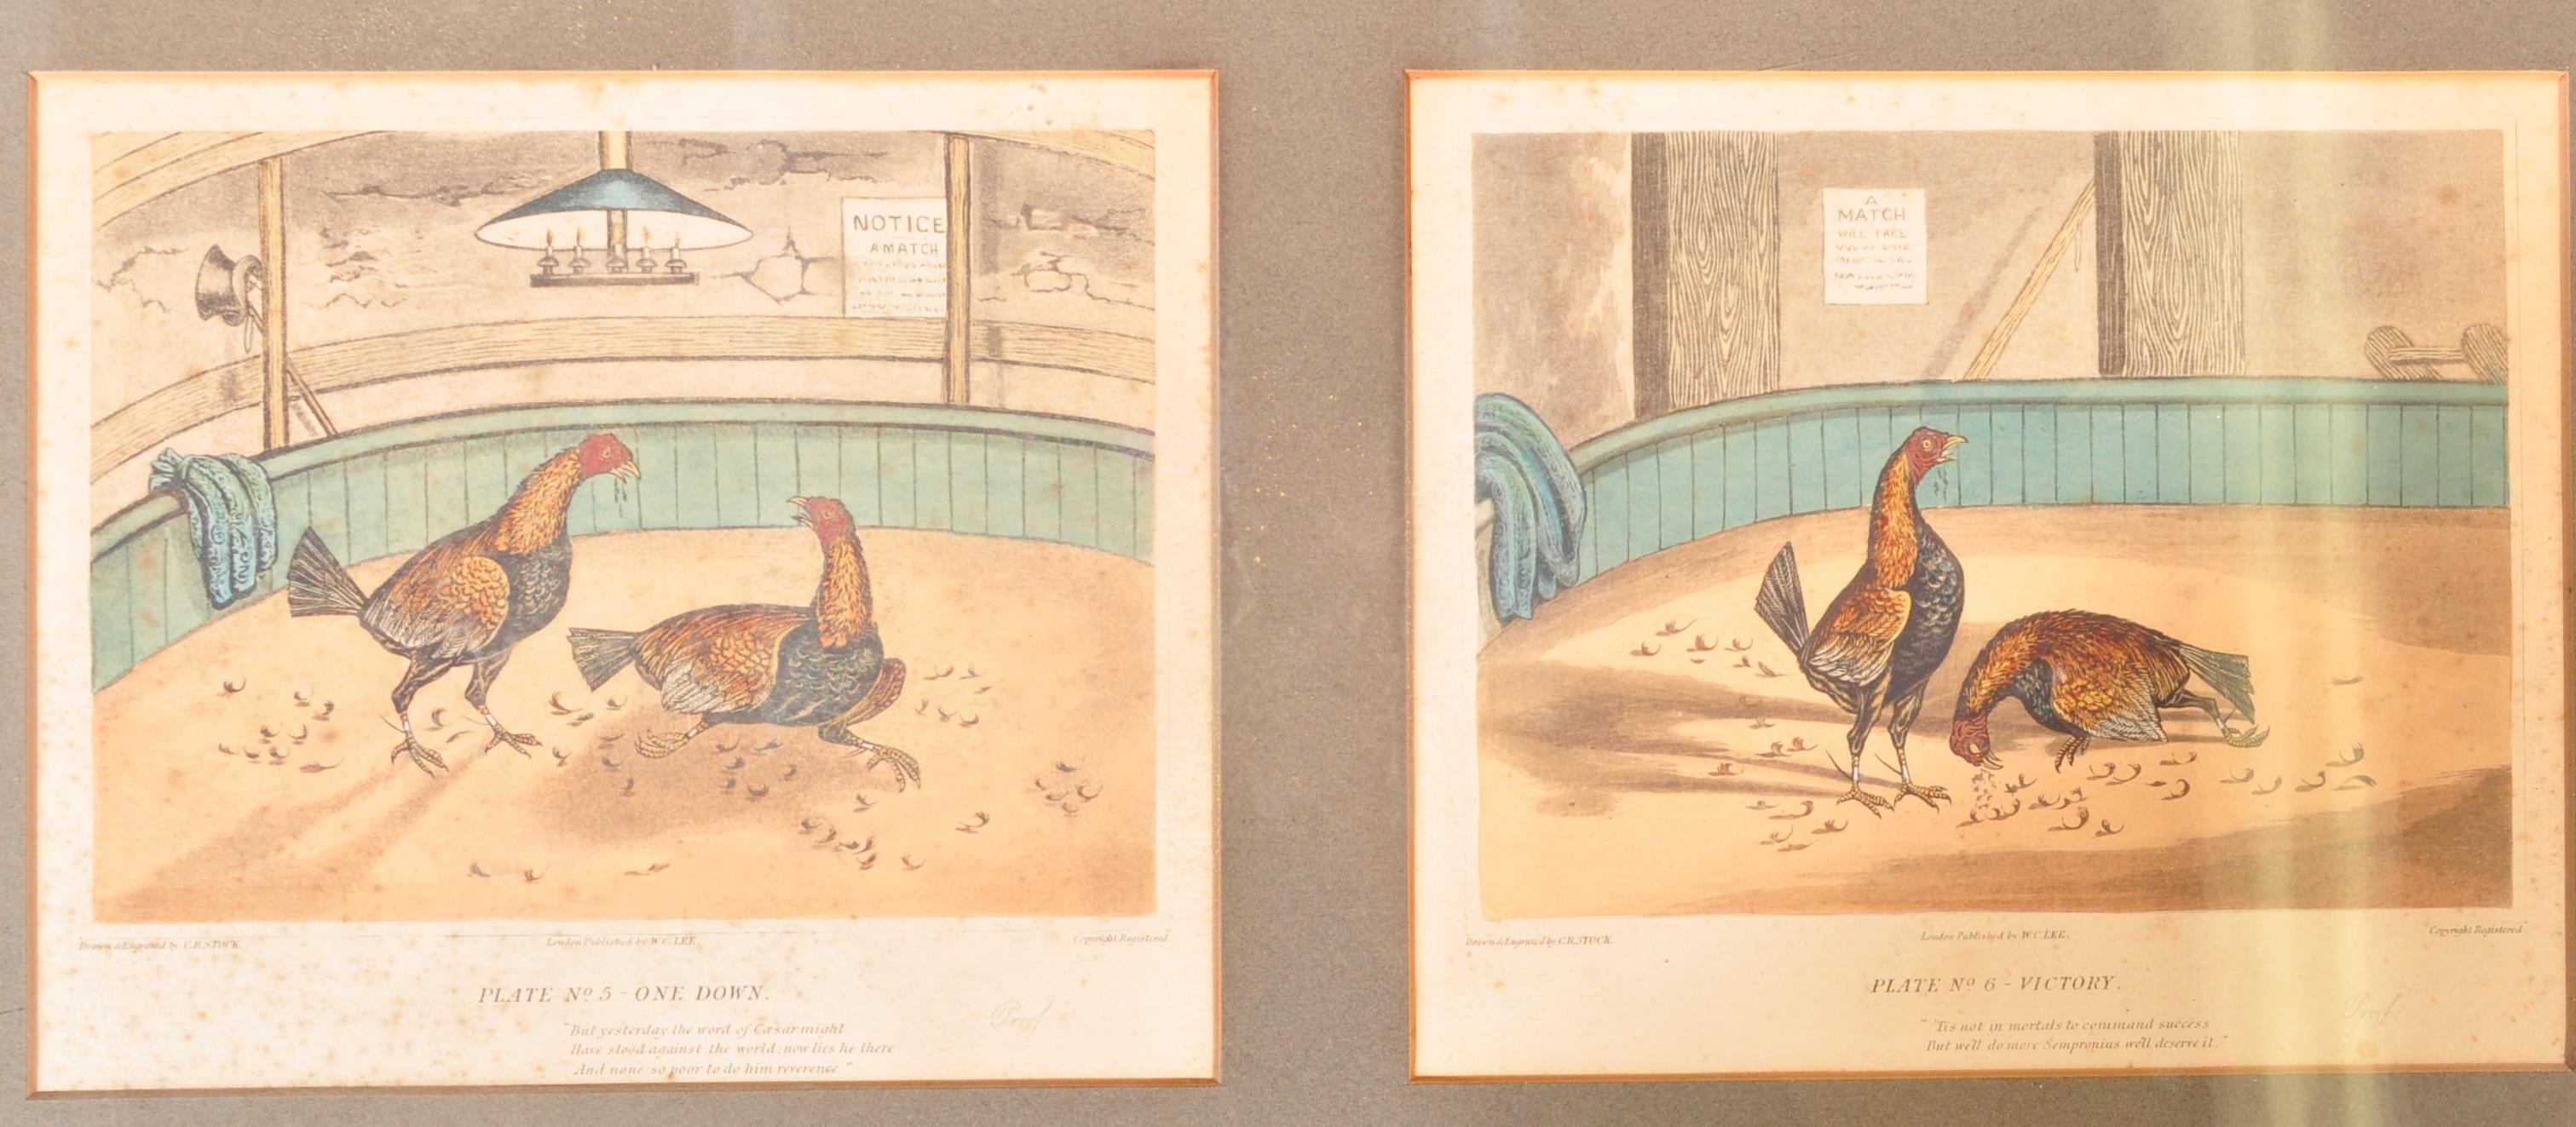 C. R. STOCK - EARLY 19TH CENTURY COCK FIGHTING ENGRAVINGS - Image 4 of 7